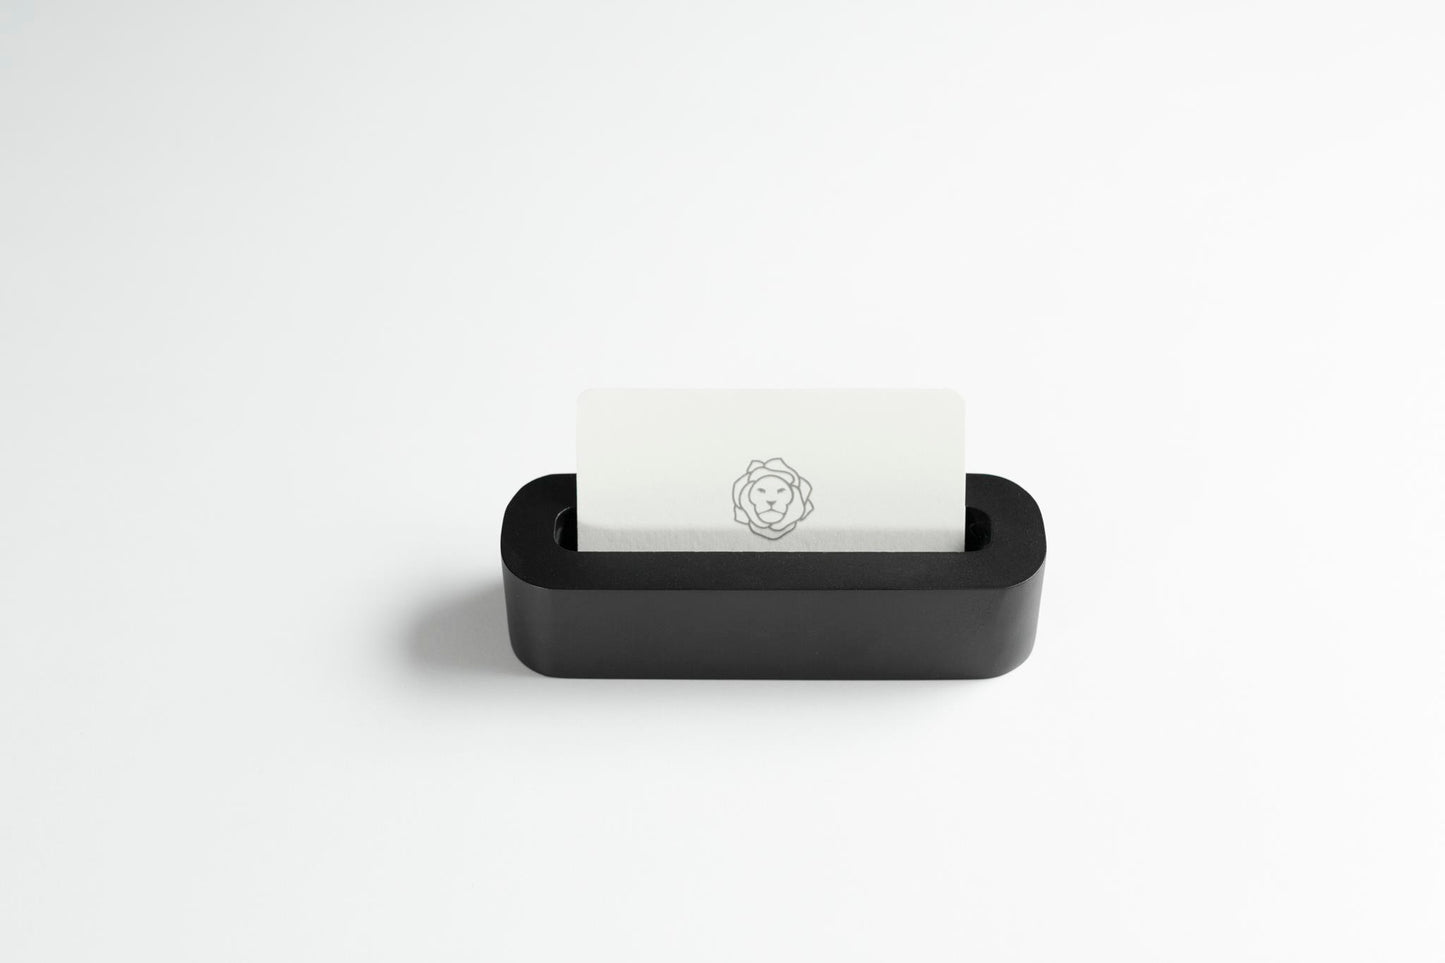 Black Oval Pen Tray with a Flower